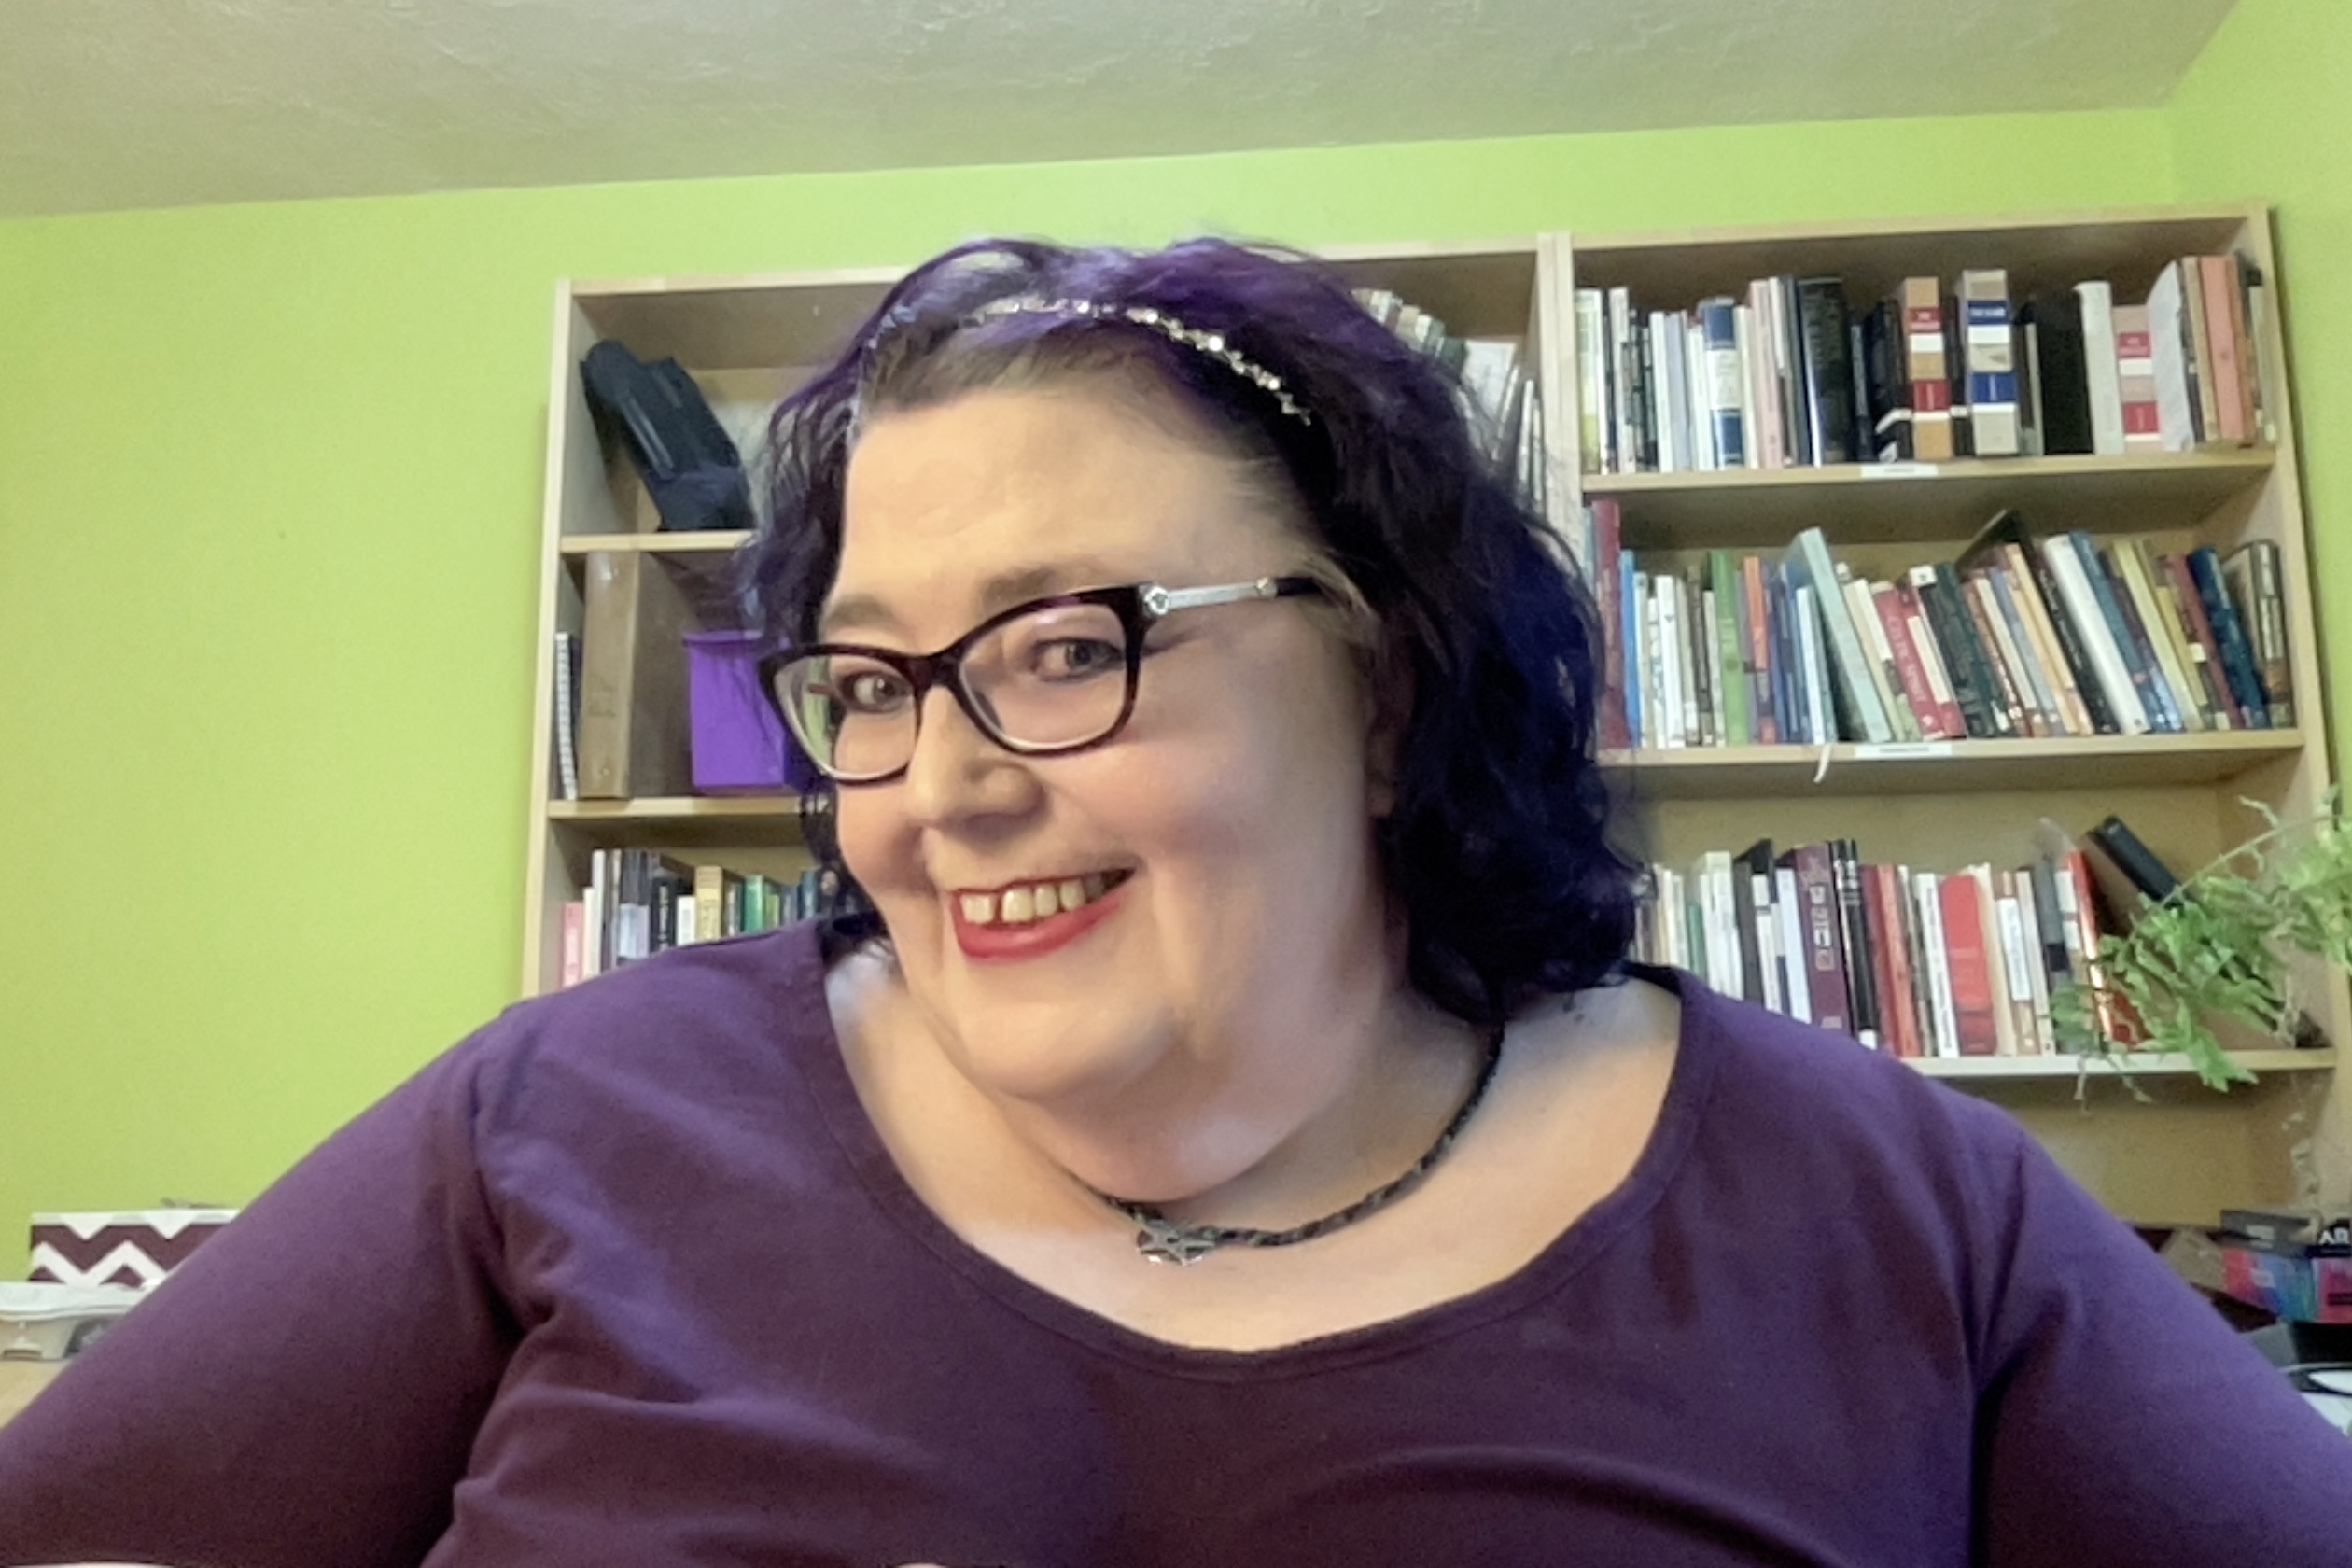 A fat white femme with a sparkly silver headbad over her shoulder-length dark violet hair. She is wearing a somewhat lighter violet dress with a scoop neckline. There are bookcases behind her.